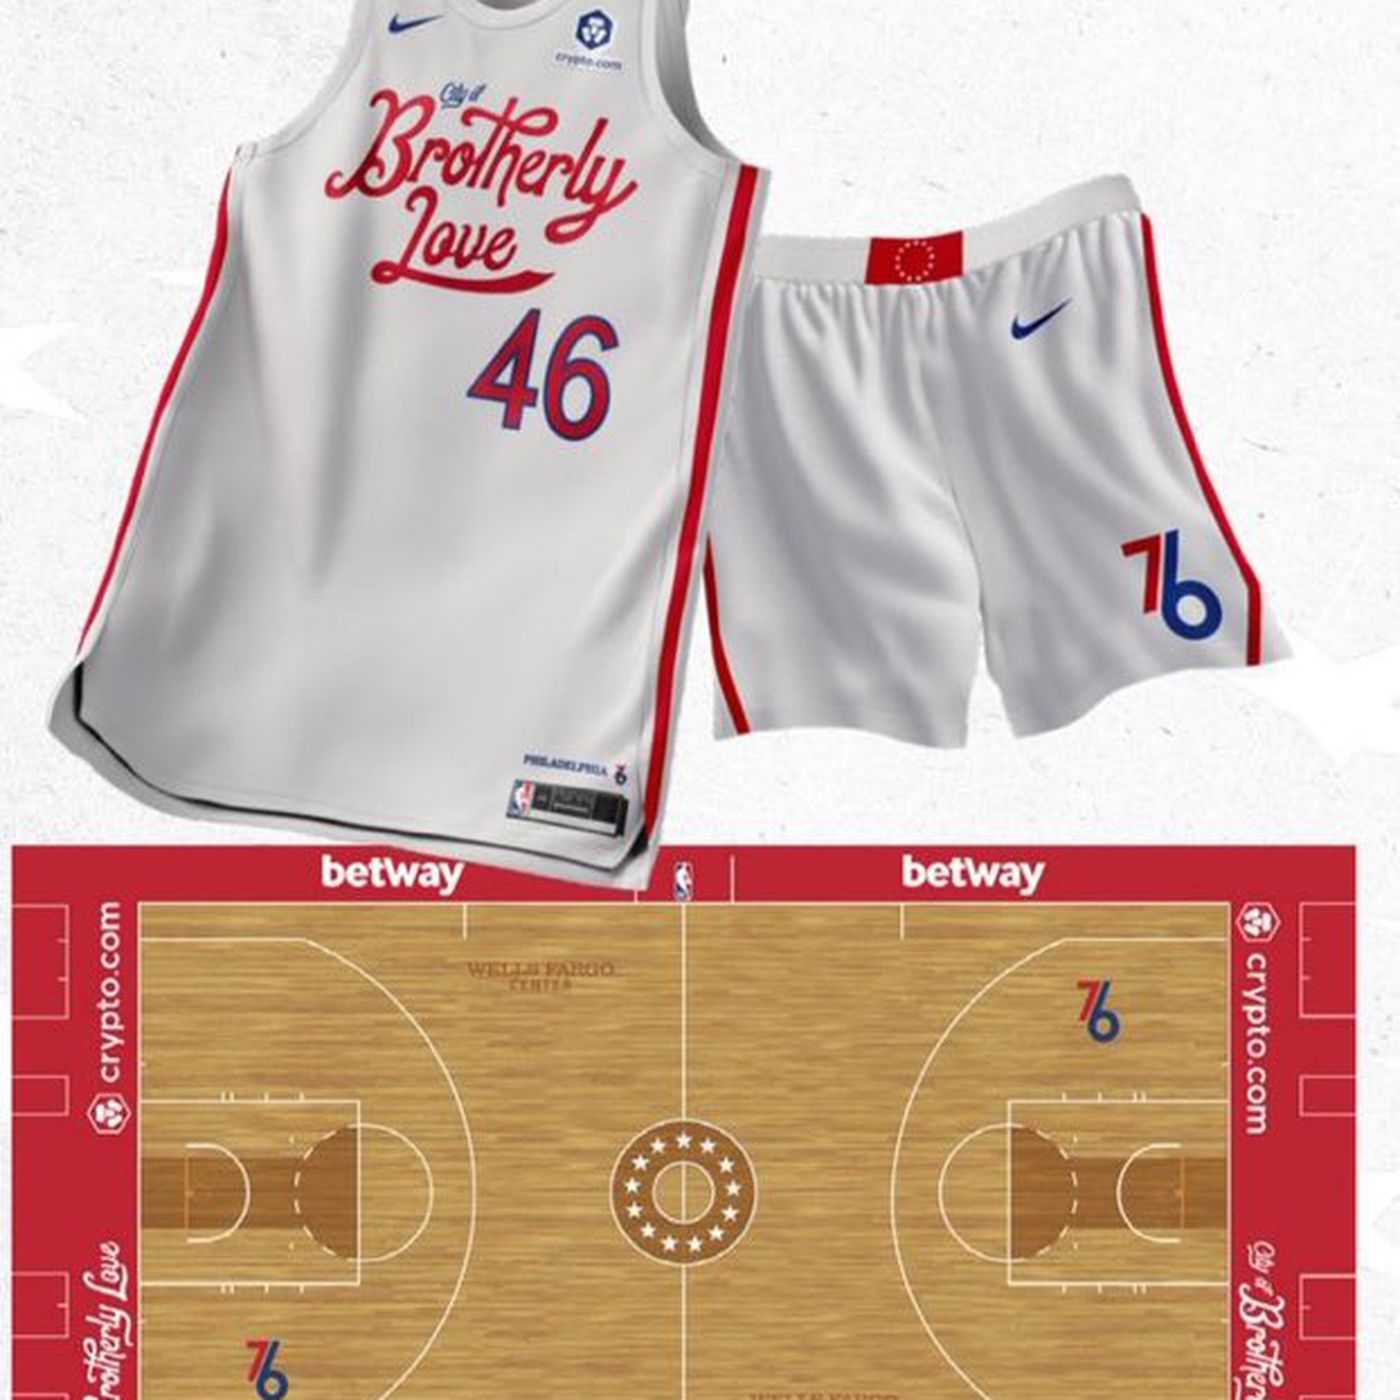 CB EXCLUSIVE: Here Are The Sixers' New Red Uniforms - Crossing Broad